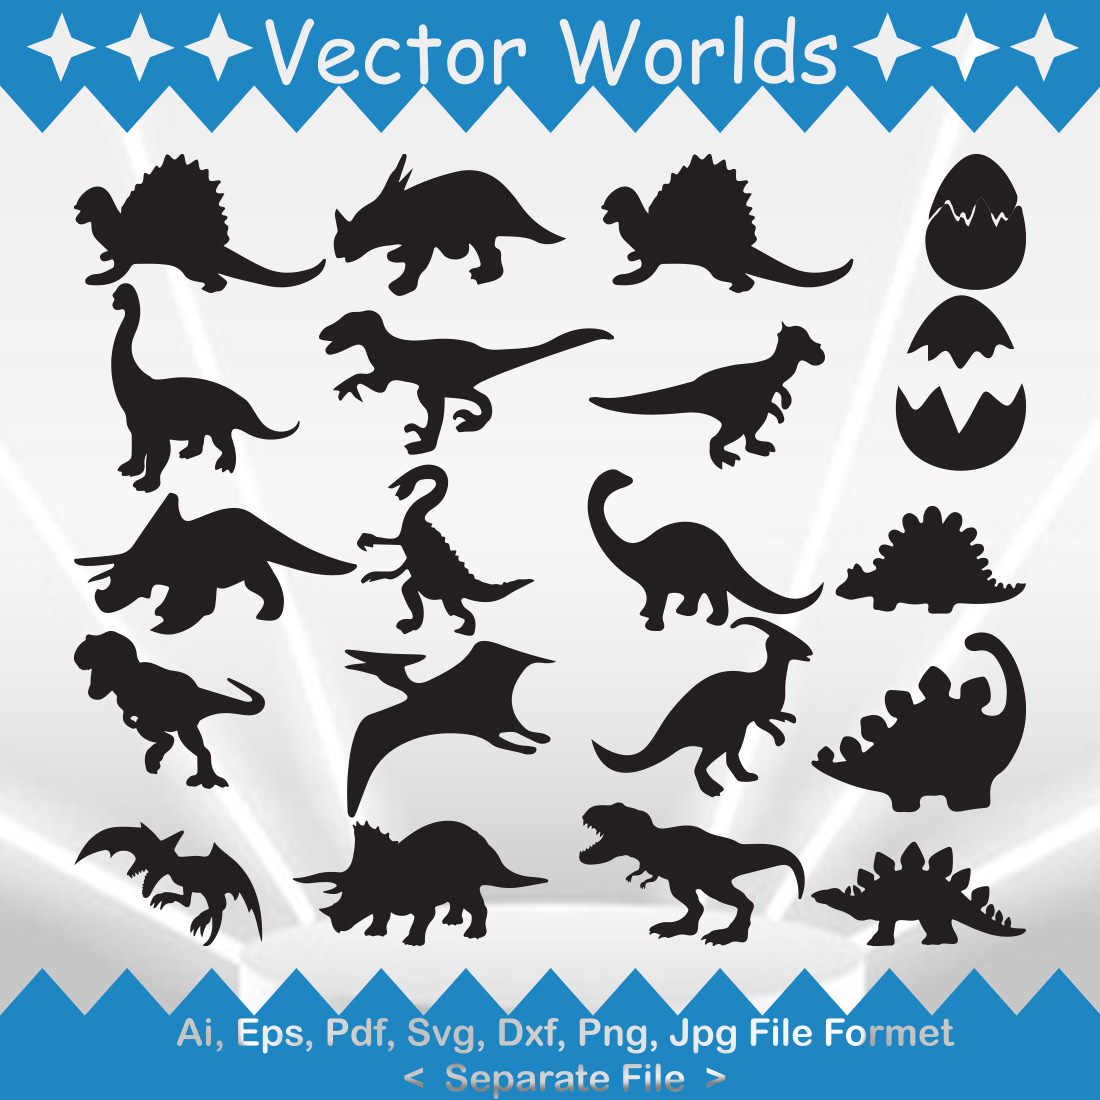 Set of silhouettes of dinosaurs.